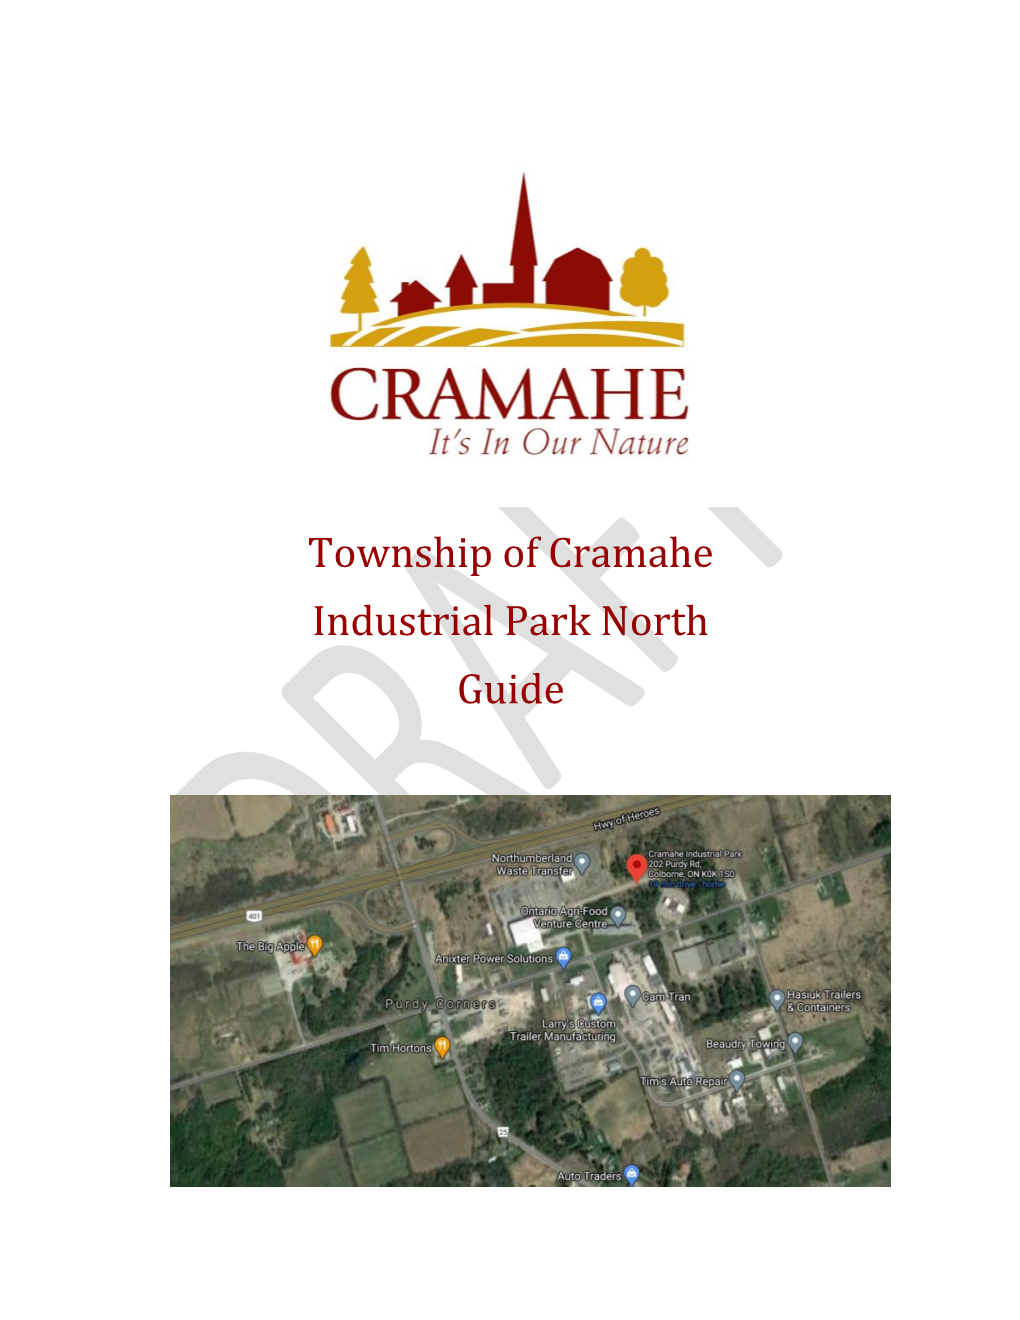 Township of Cramahe Industrial Park North Guide